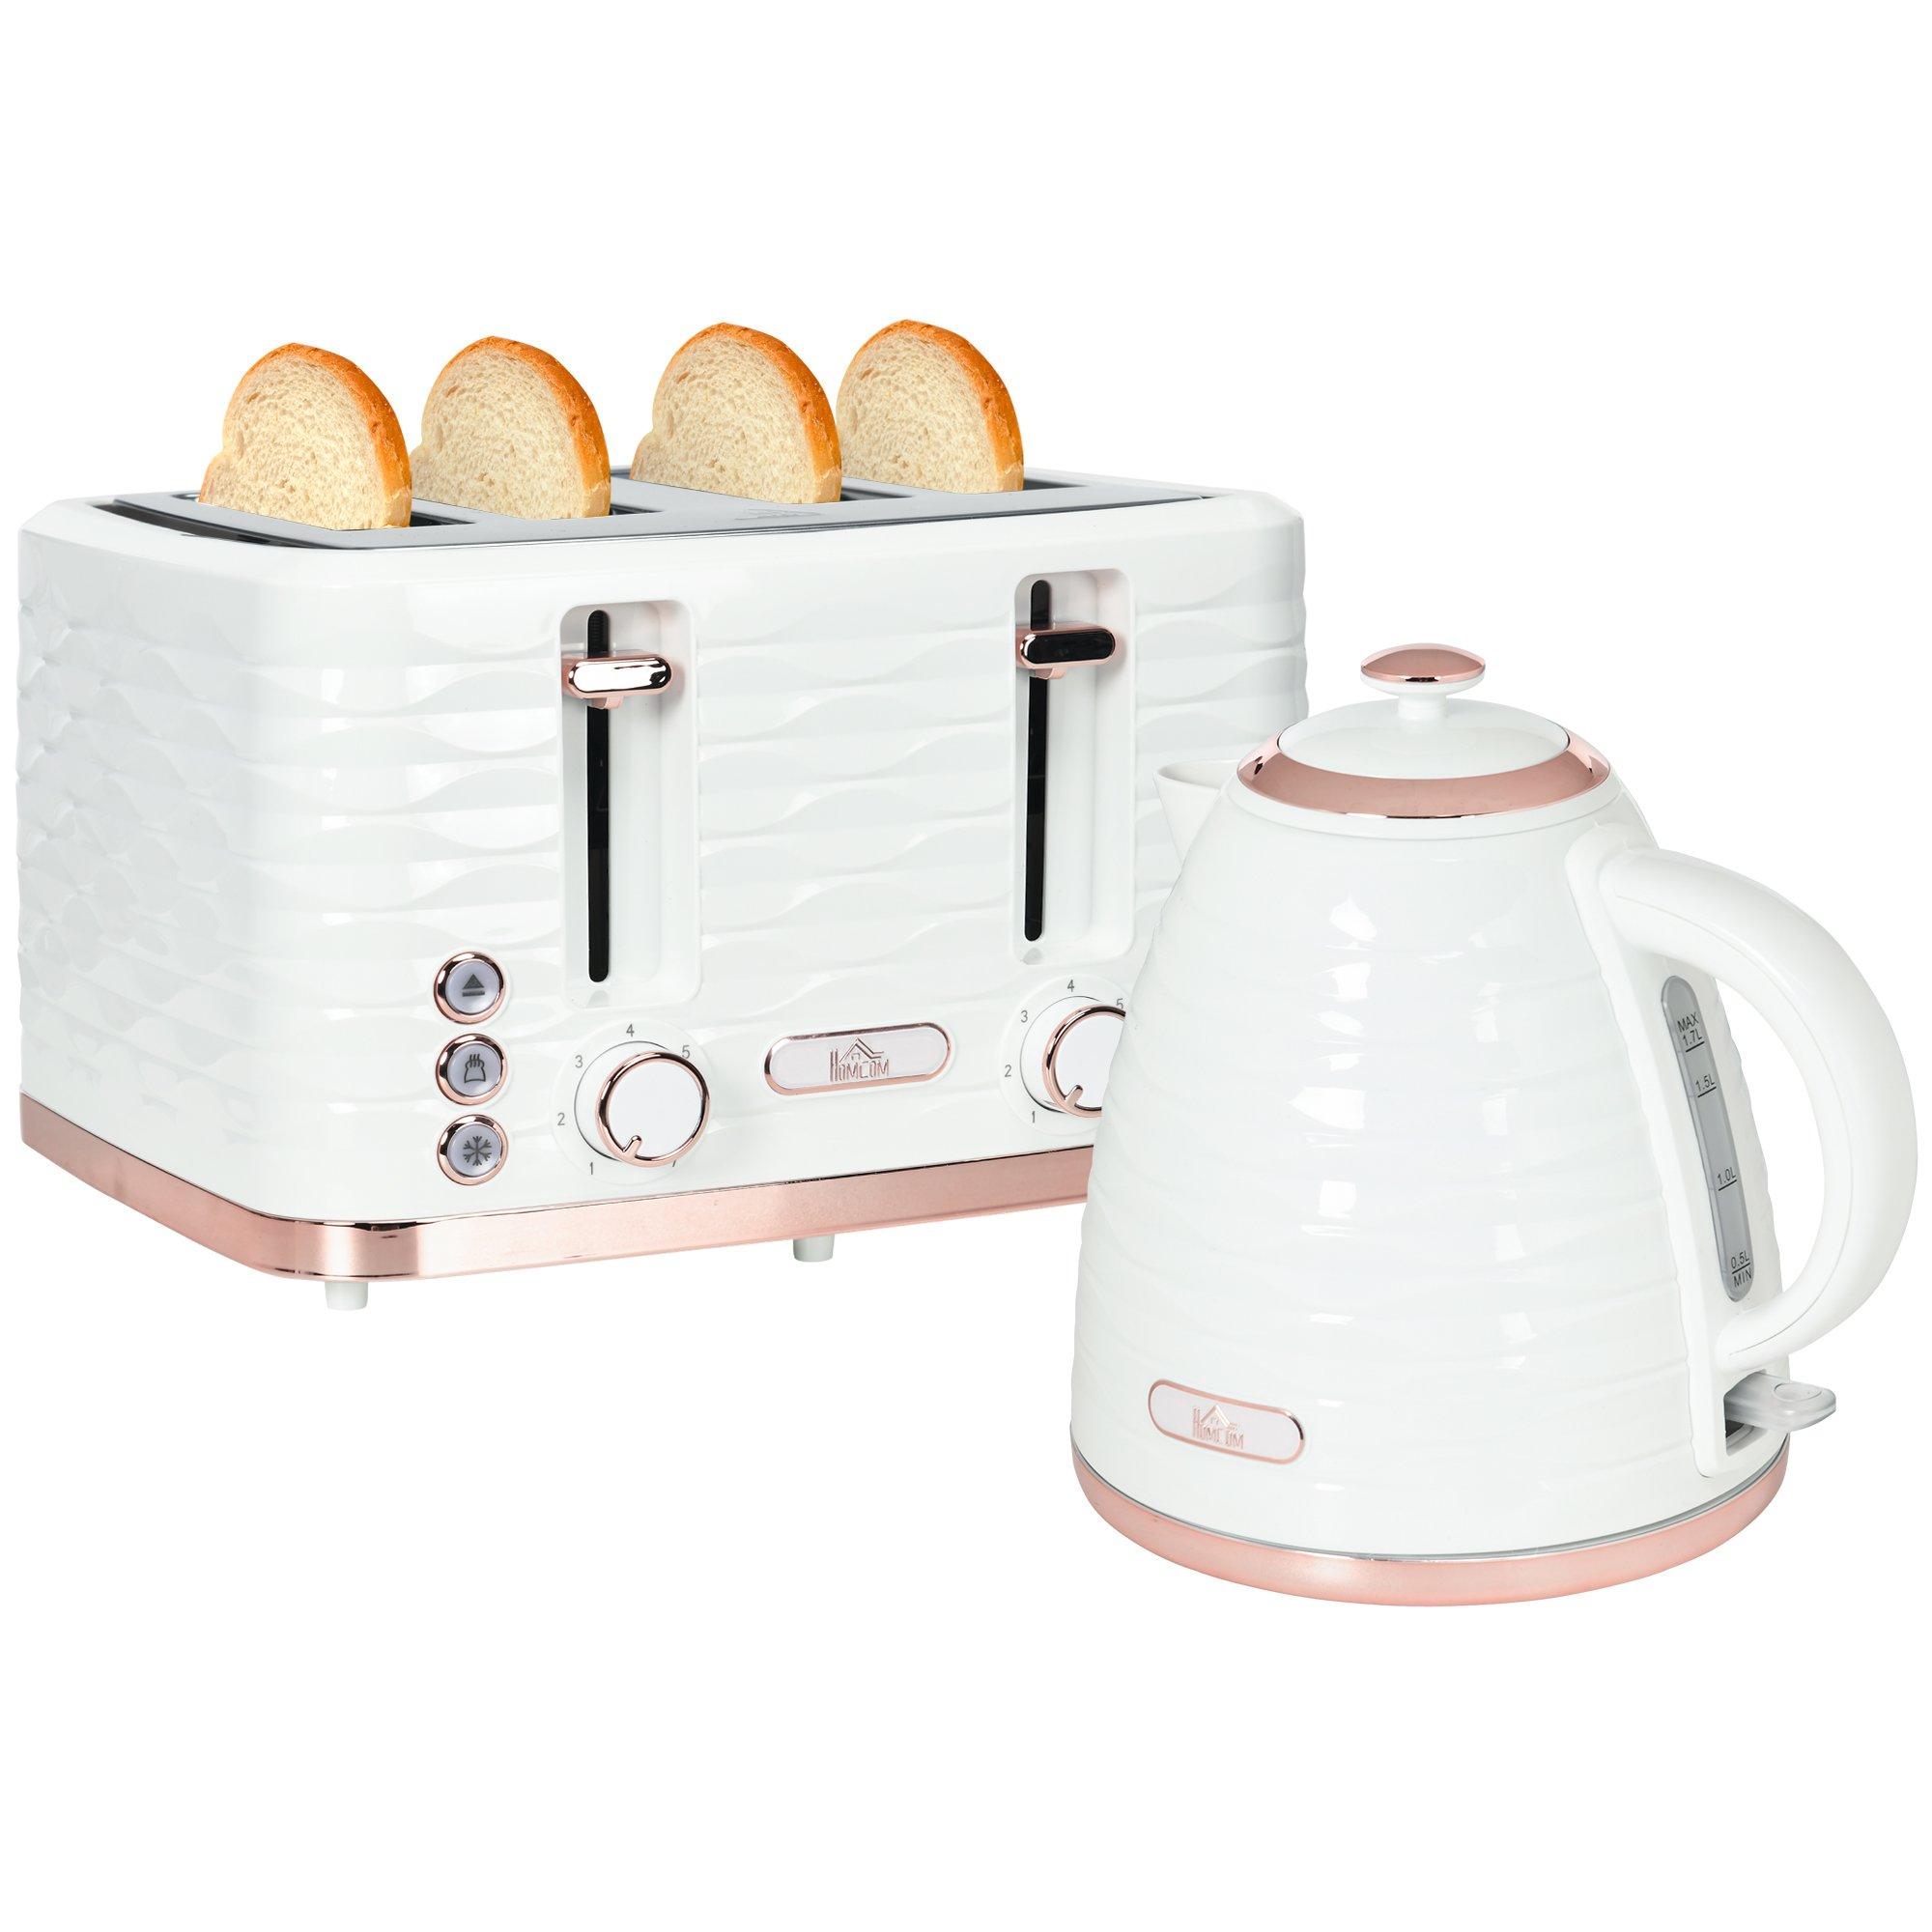 HOMCOM Kettle and Toaster Sets 1.7L Kettle 4 Slice Toaster Browning Control